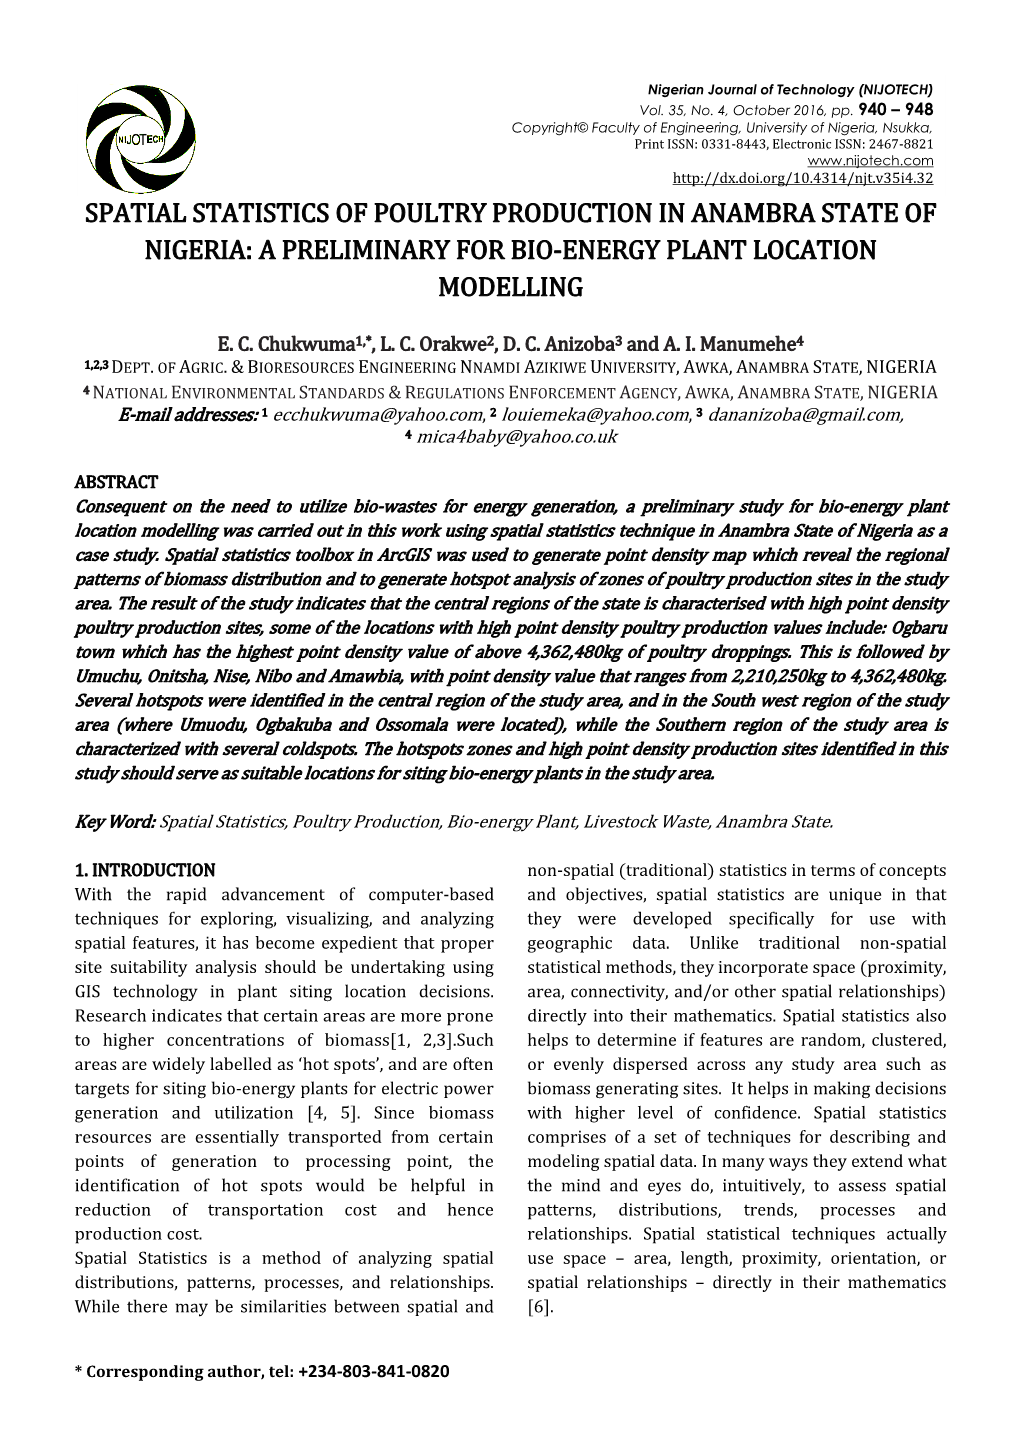 Spatial Statistics of Poultry Production in Anambra State of Nigeria: a Preliminary for Bio-Energy Plant Location Modelling